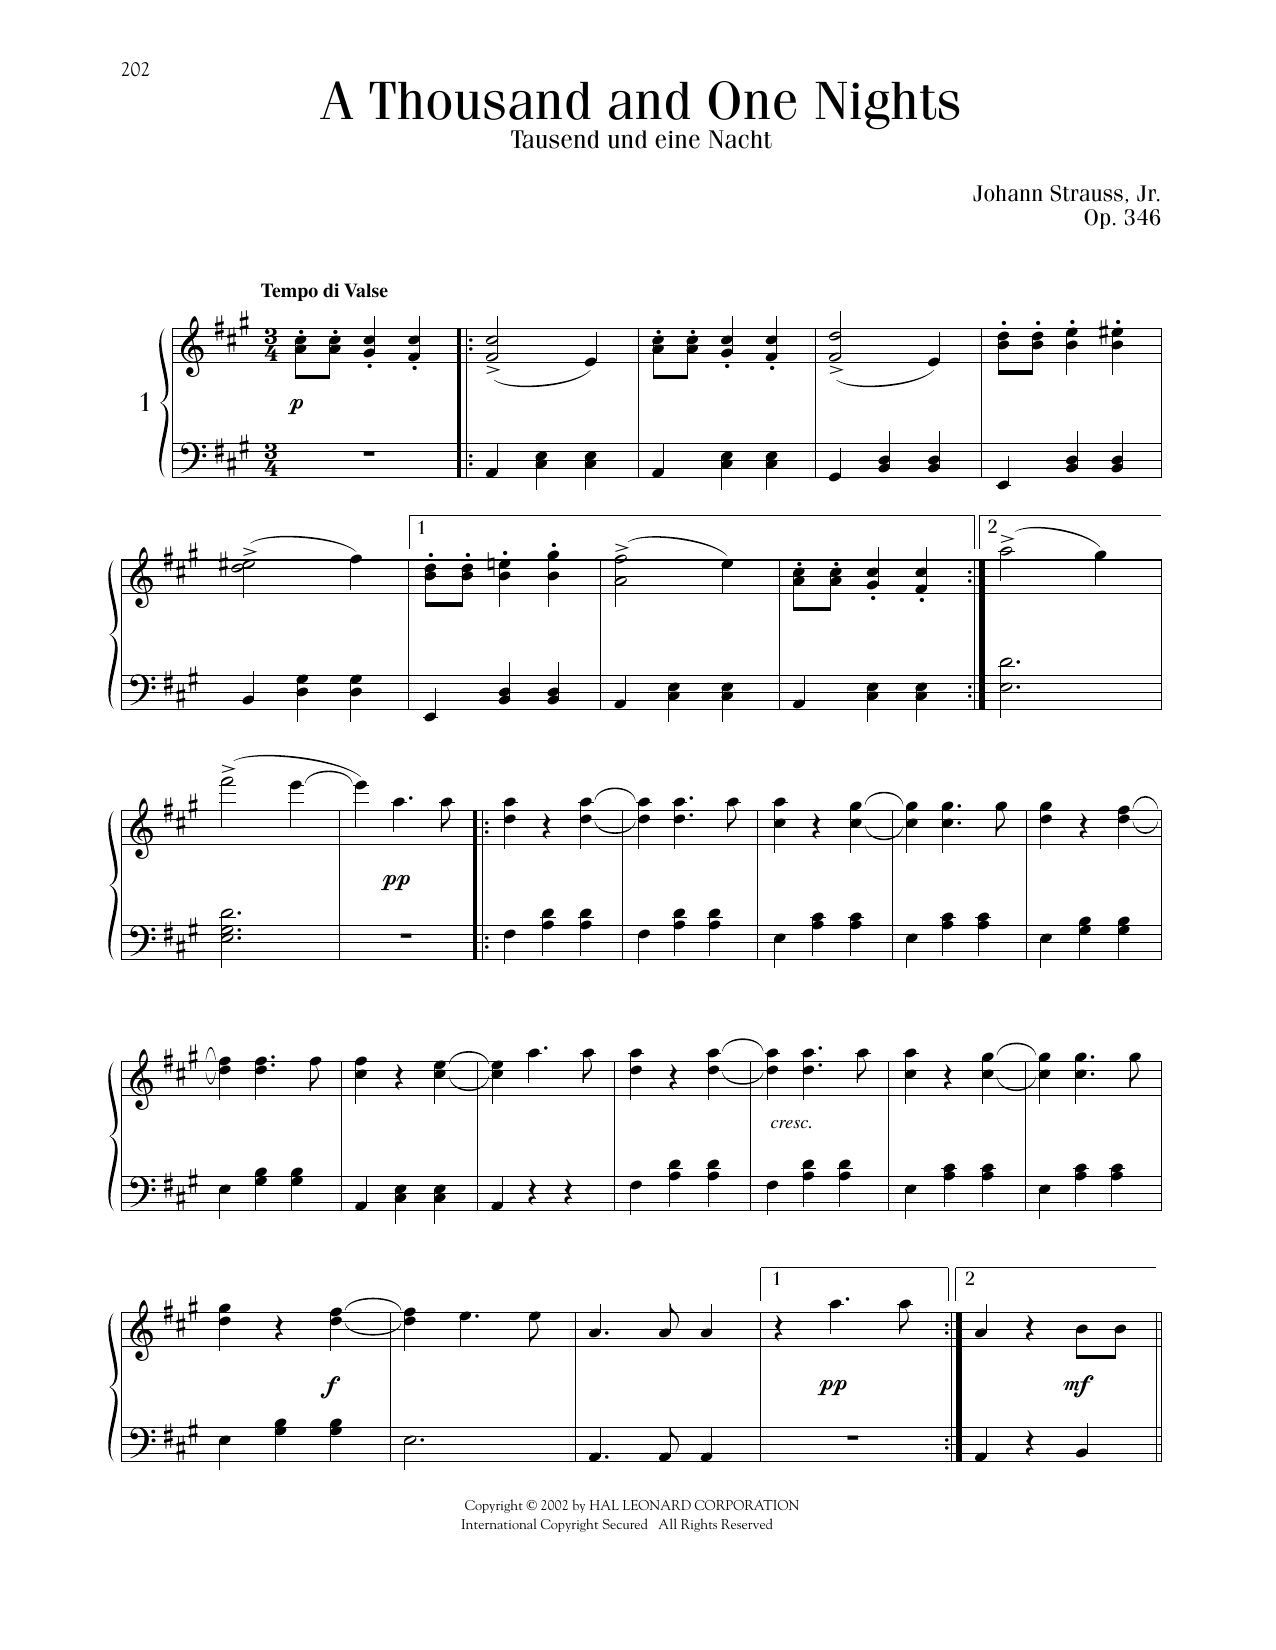 Johann Strauss A Thousand And One Nights, Op. 346 sheet music notes printable PDF score